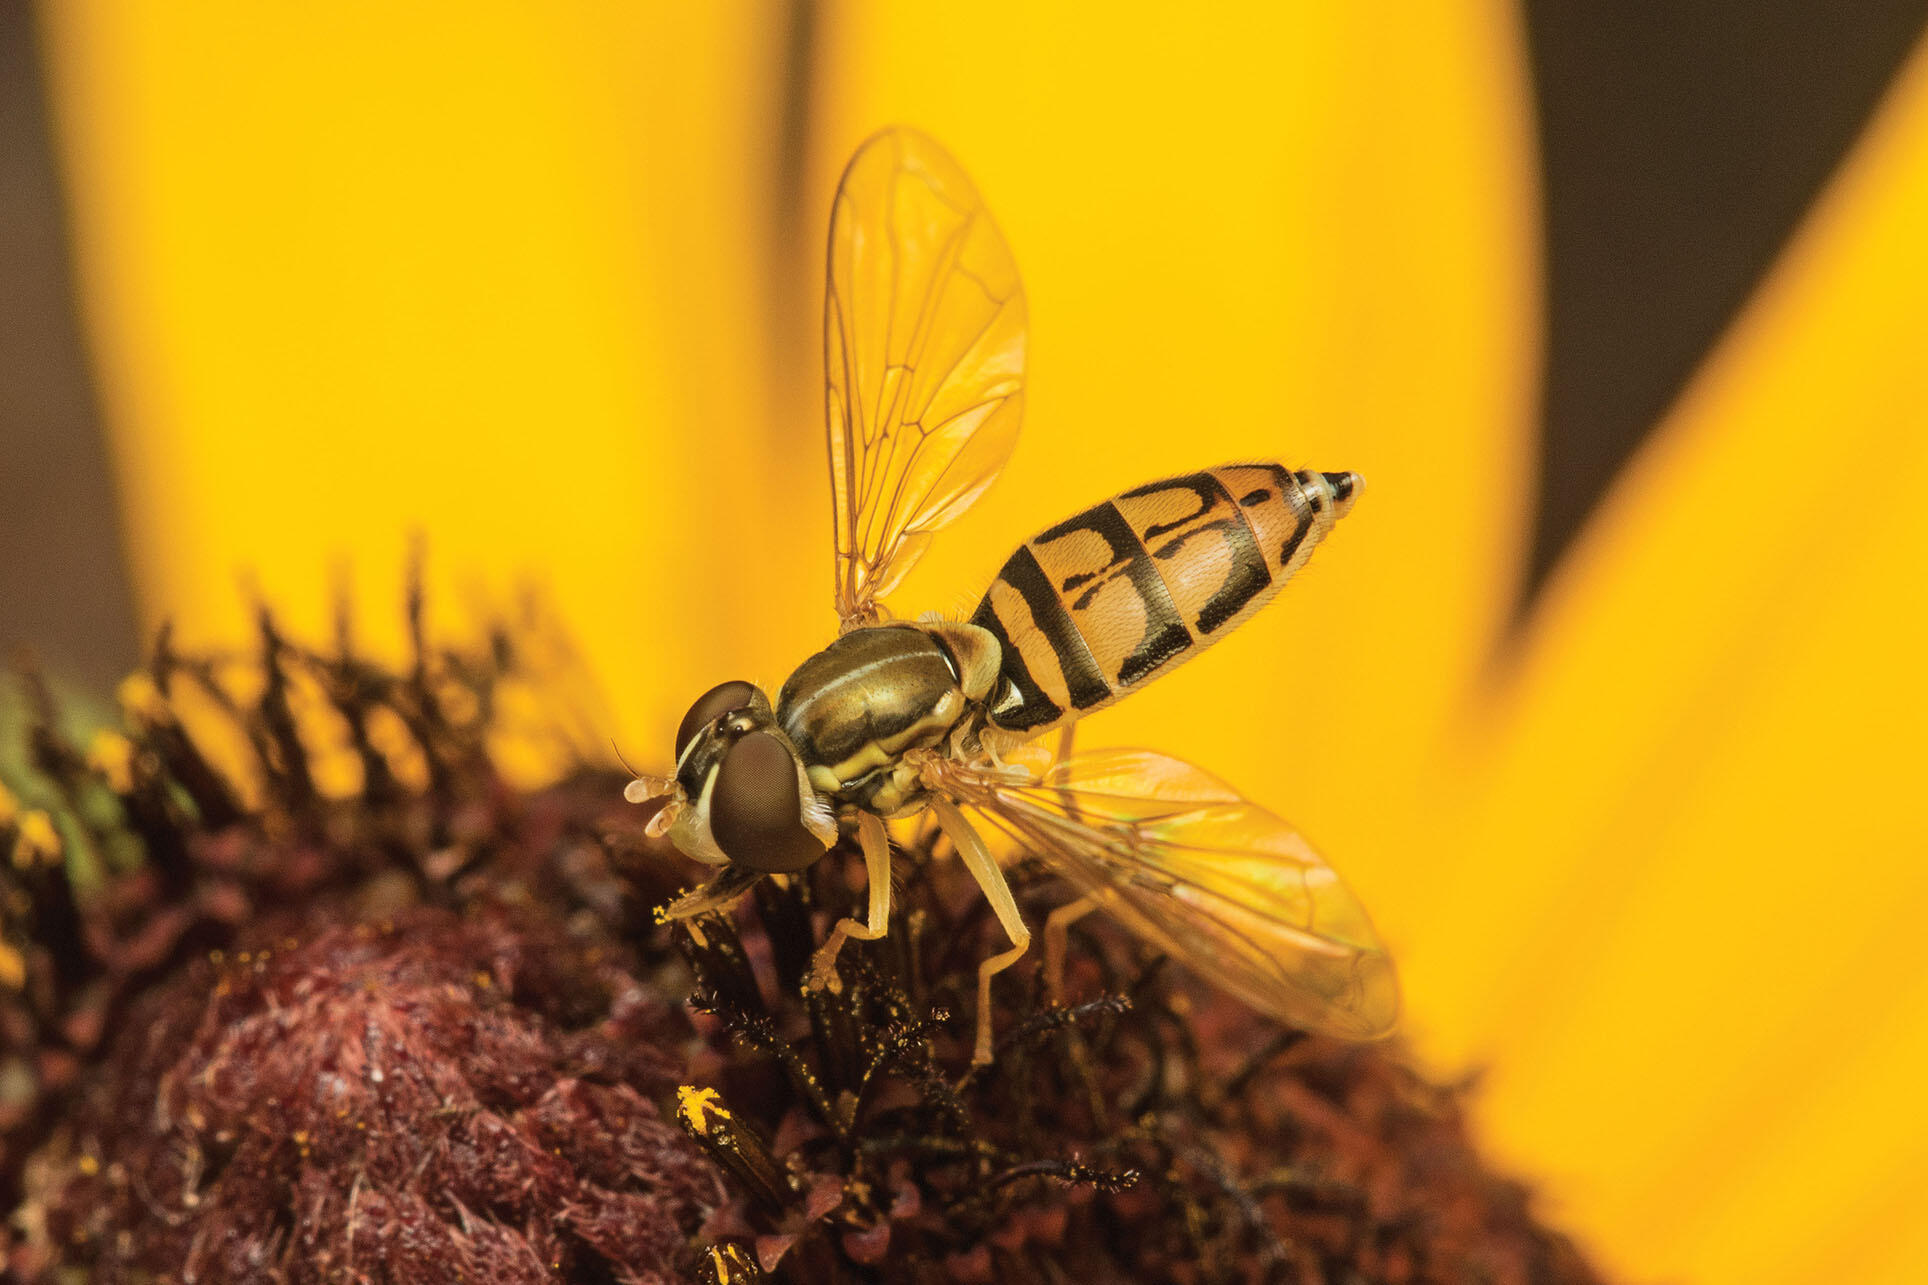 A bright yellow hoverfly. (Photo by Rollin Coville.)